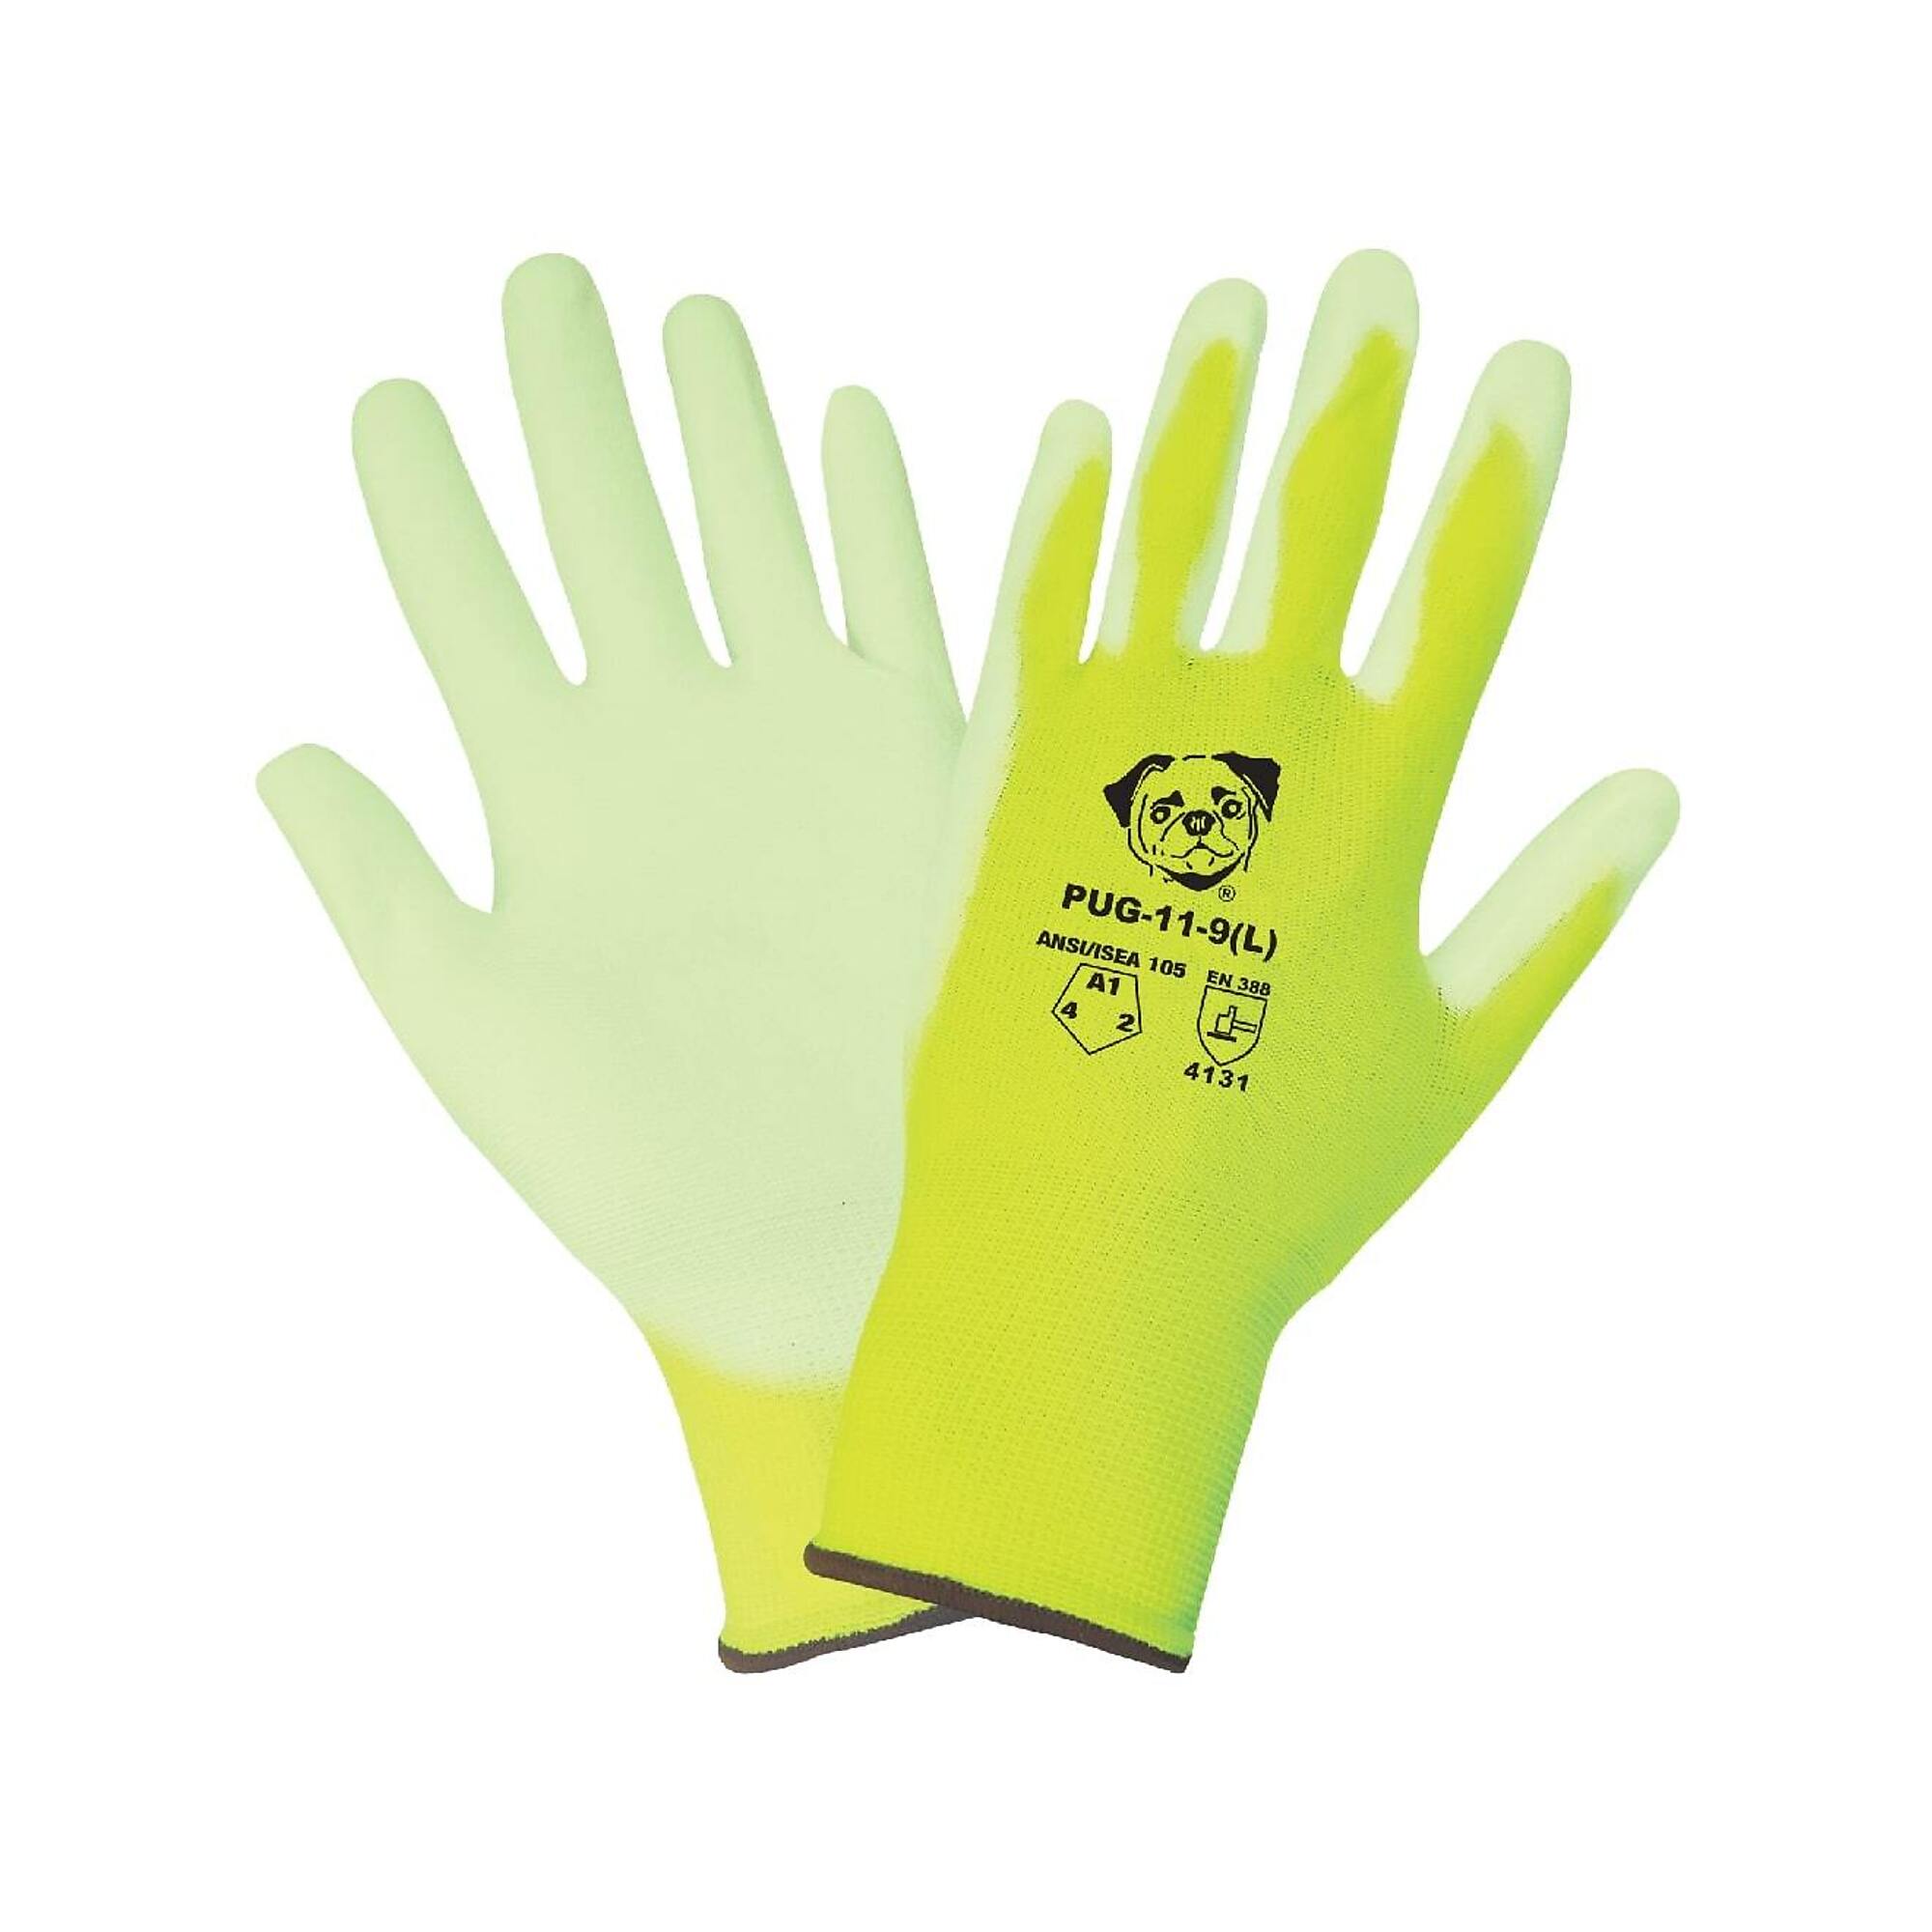 Global Glove PUG , HV Y/G, Poly Coated, Cut Resistant A1 Gloves - 12 Pairs, Size S, Color High-Visibility Yellow/Green, Included (qty.) 12 Model PUG-